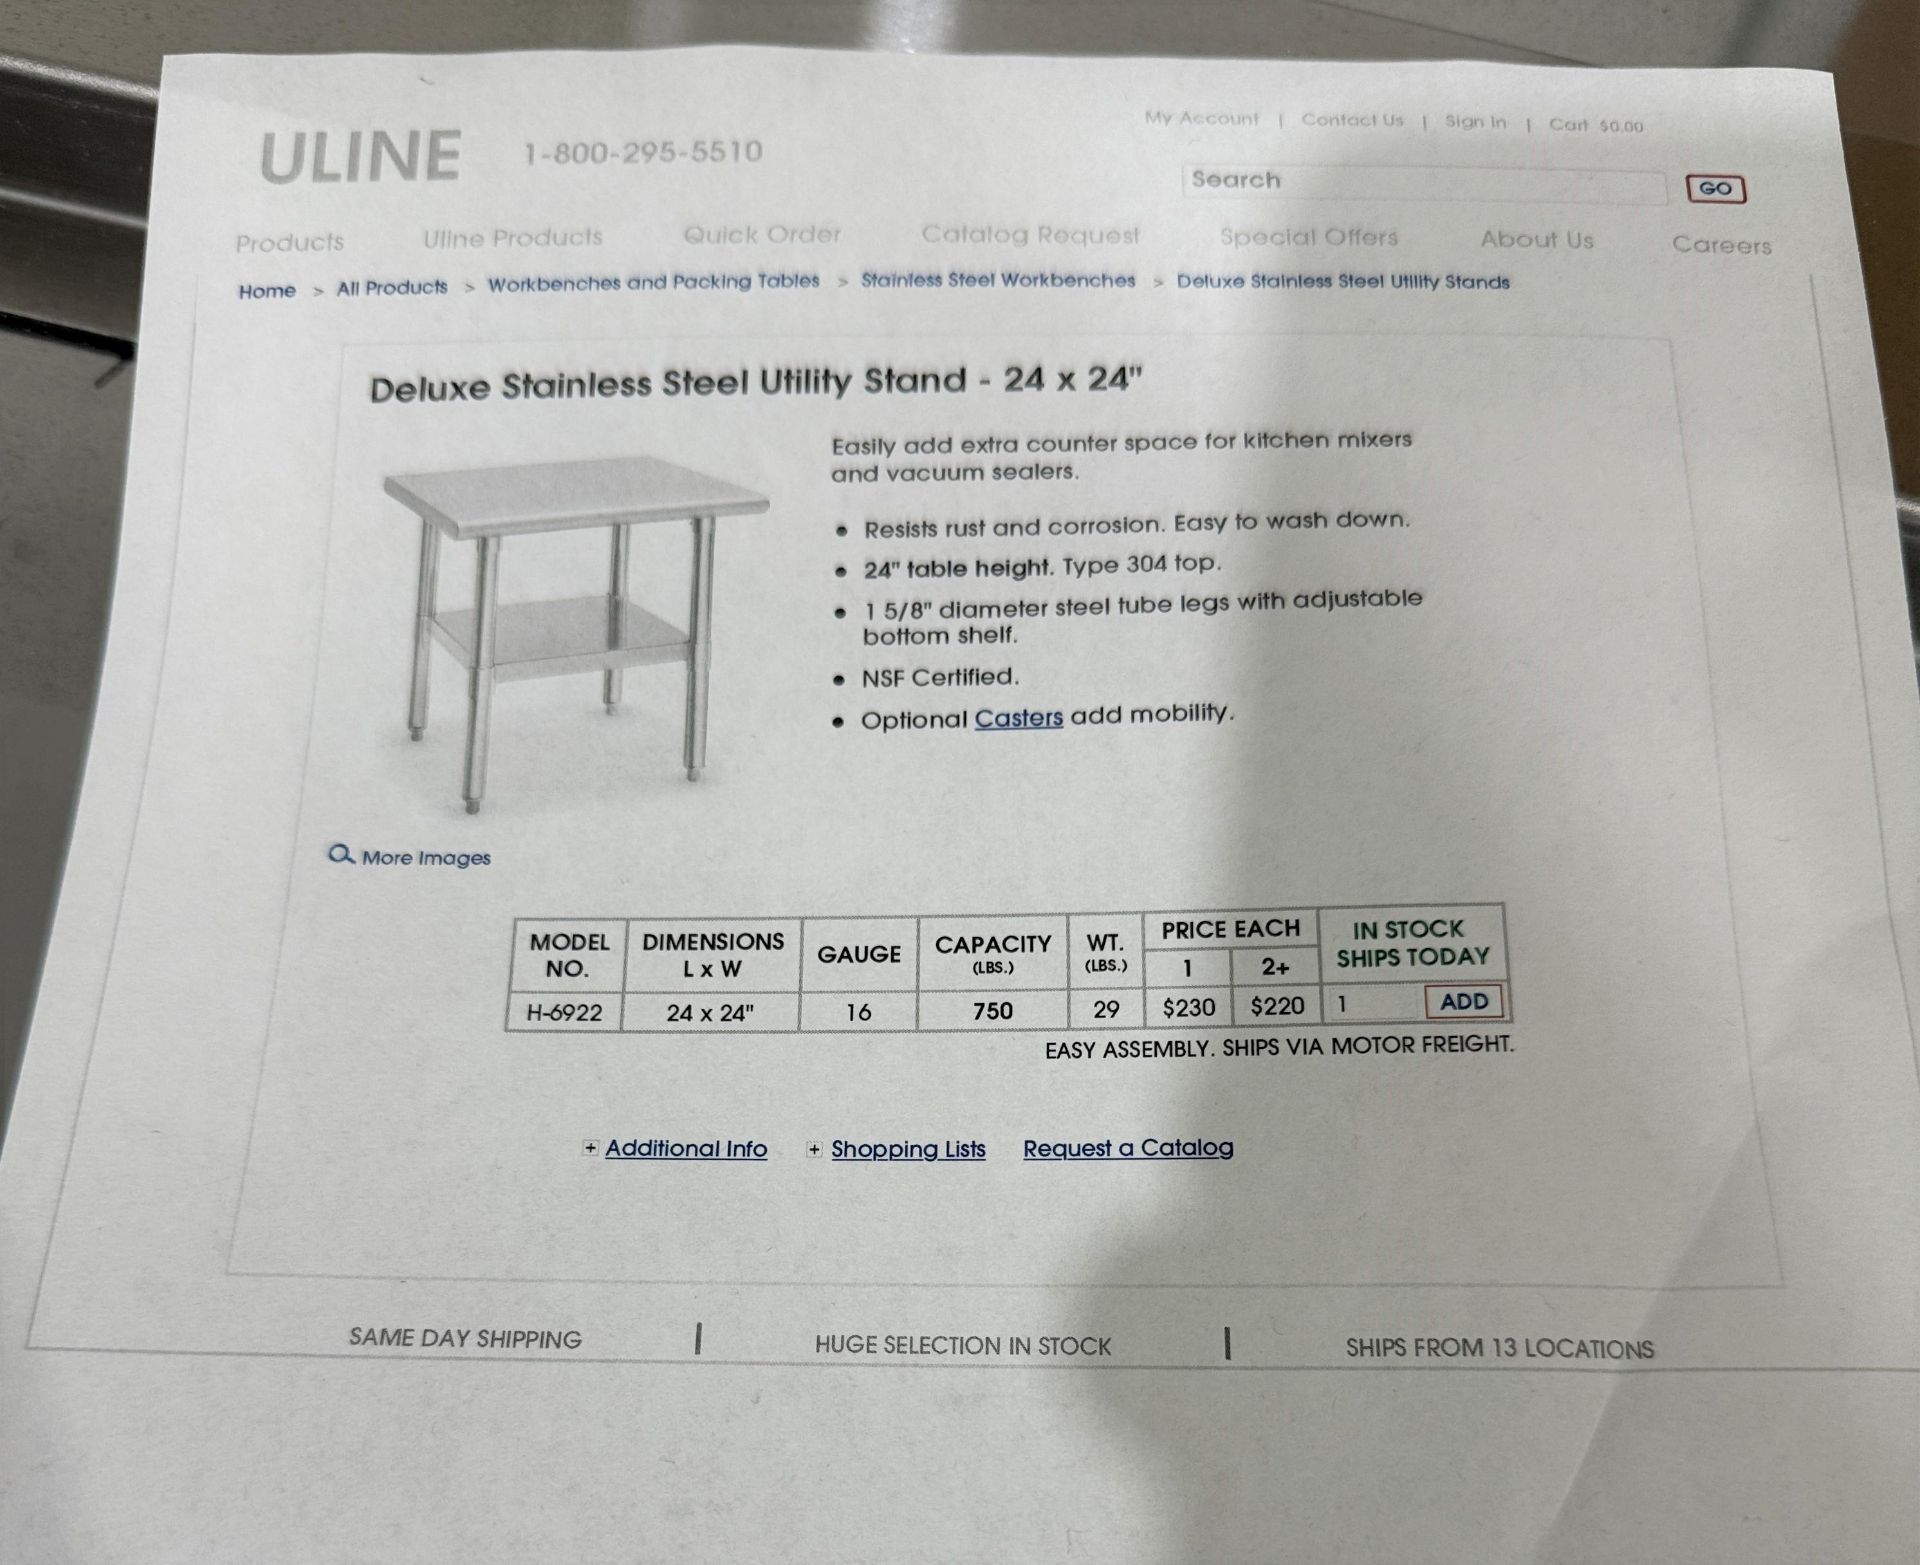 ULINE DELUXE STAINLESS STEEL UTILITY STAND, MODEL H-6922, 24" X 24", UNASSEMBLED - Image 2 of 2